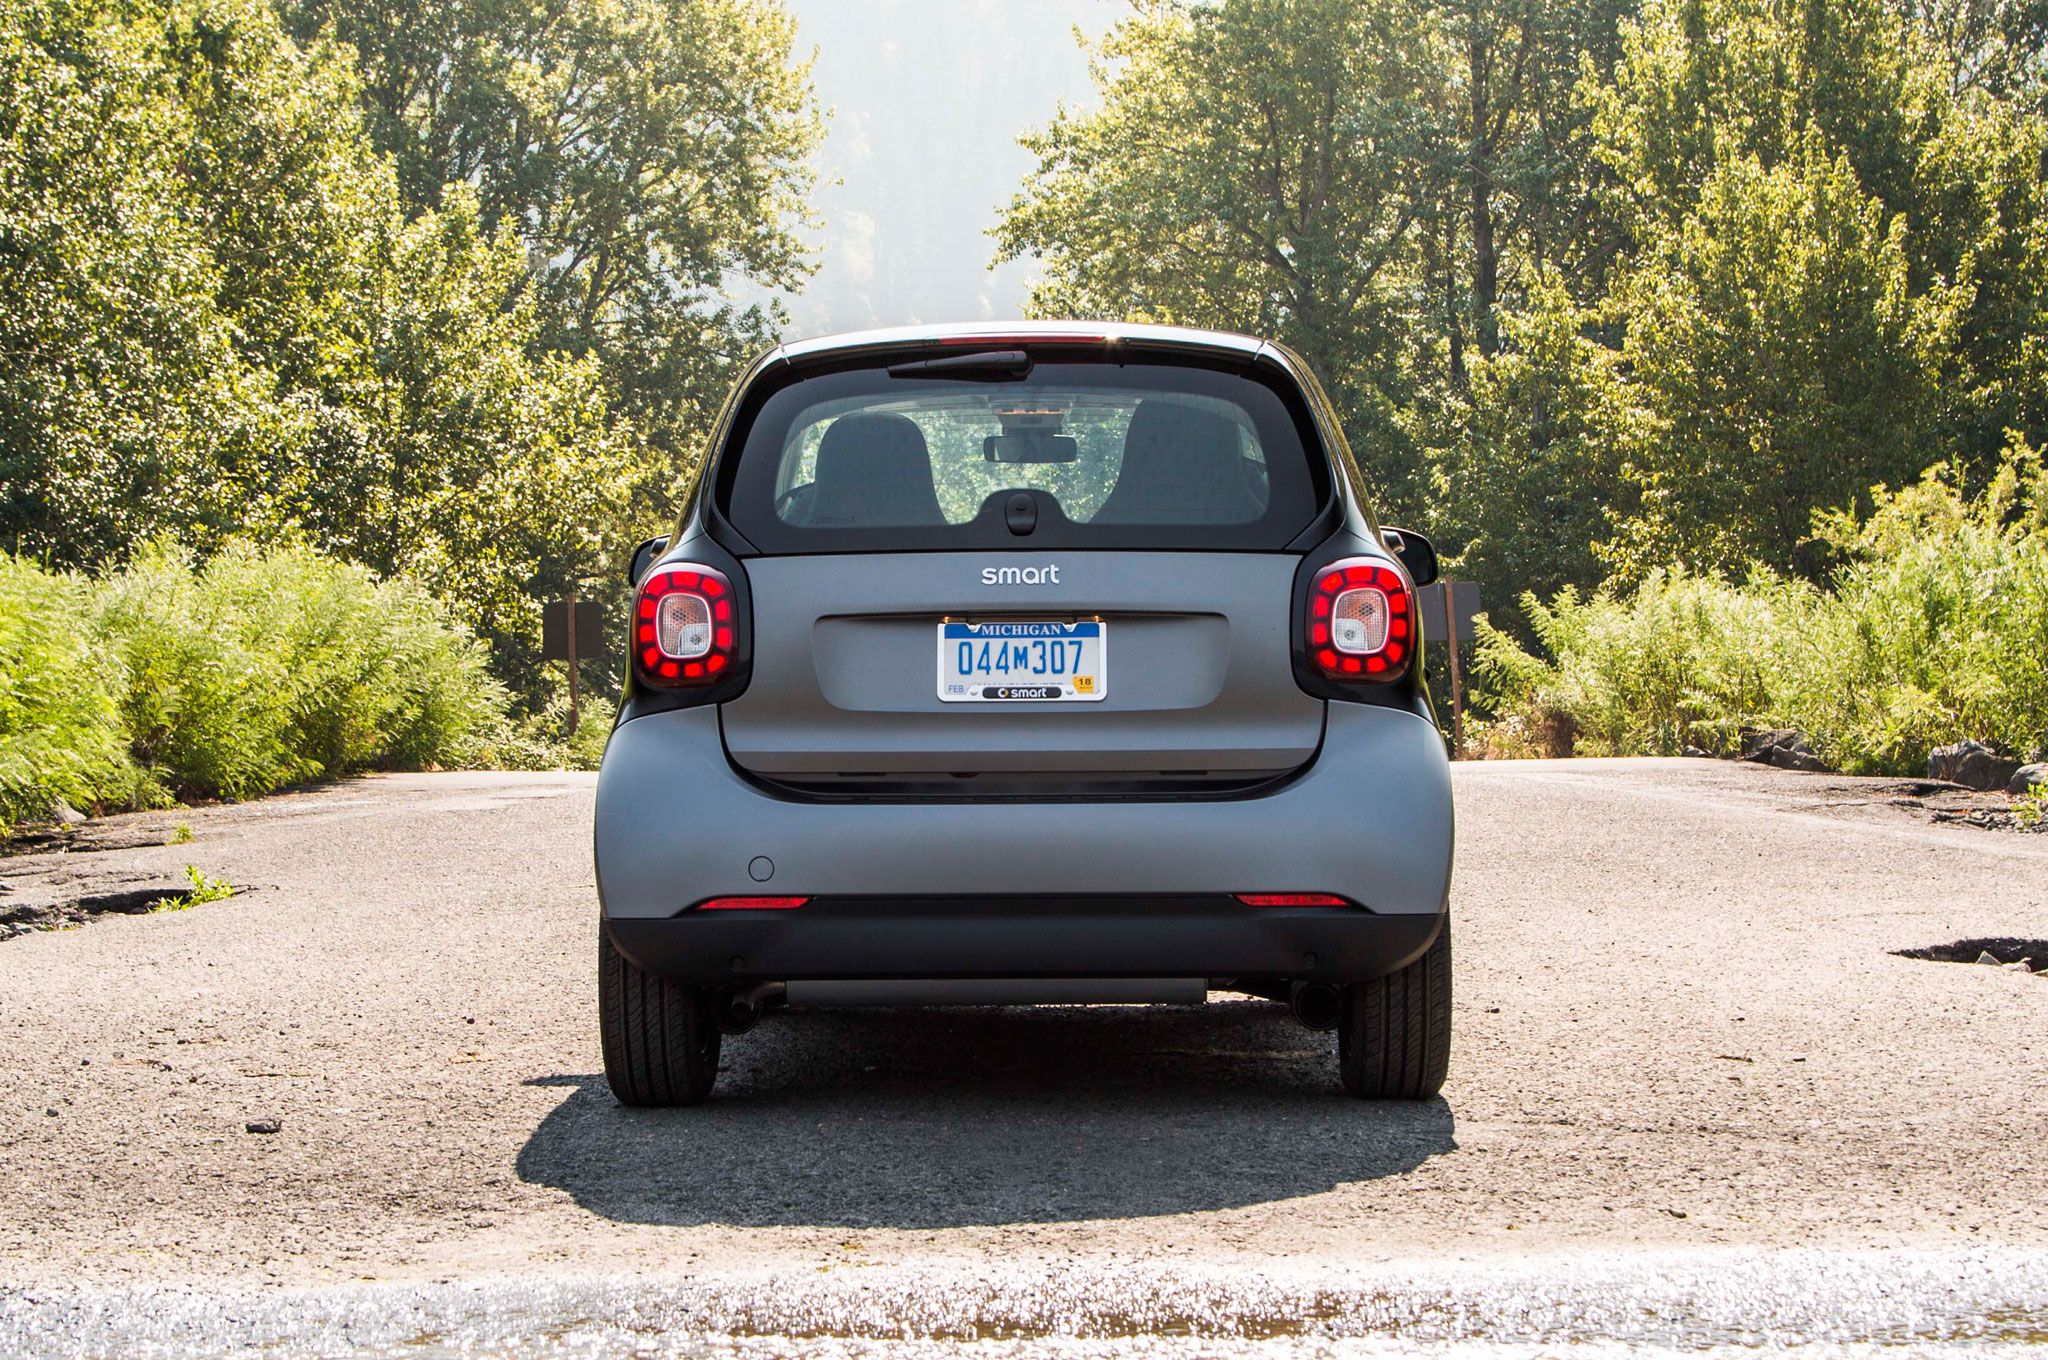 2016 Smart Fortwo Rear End Design (View 15 of 17)